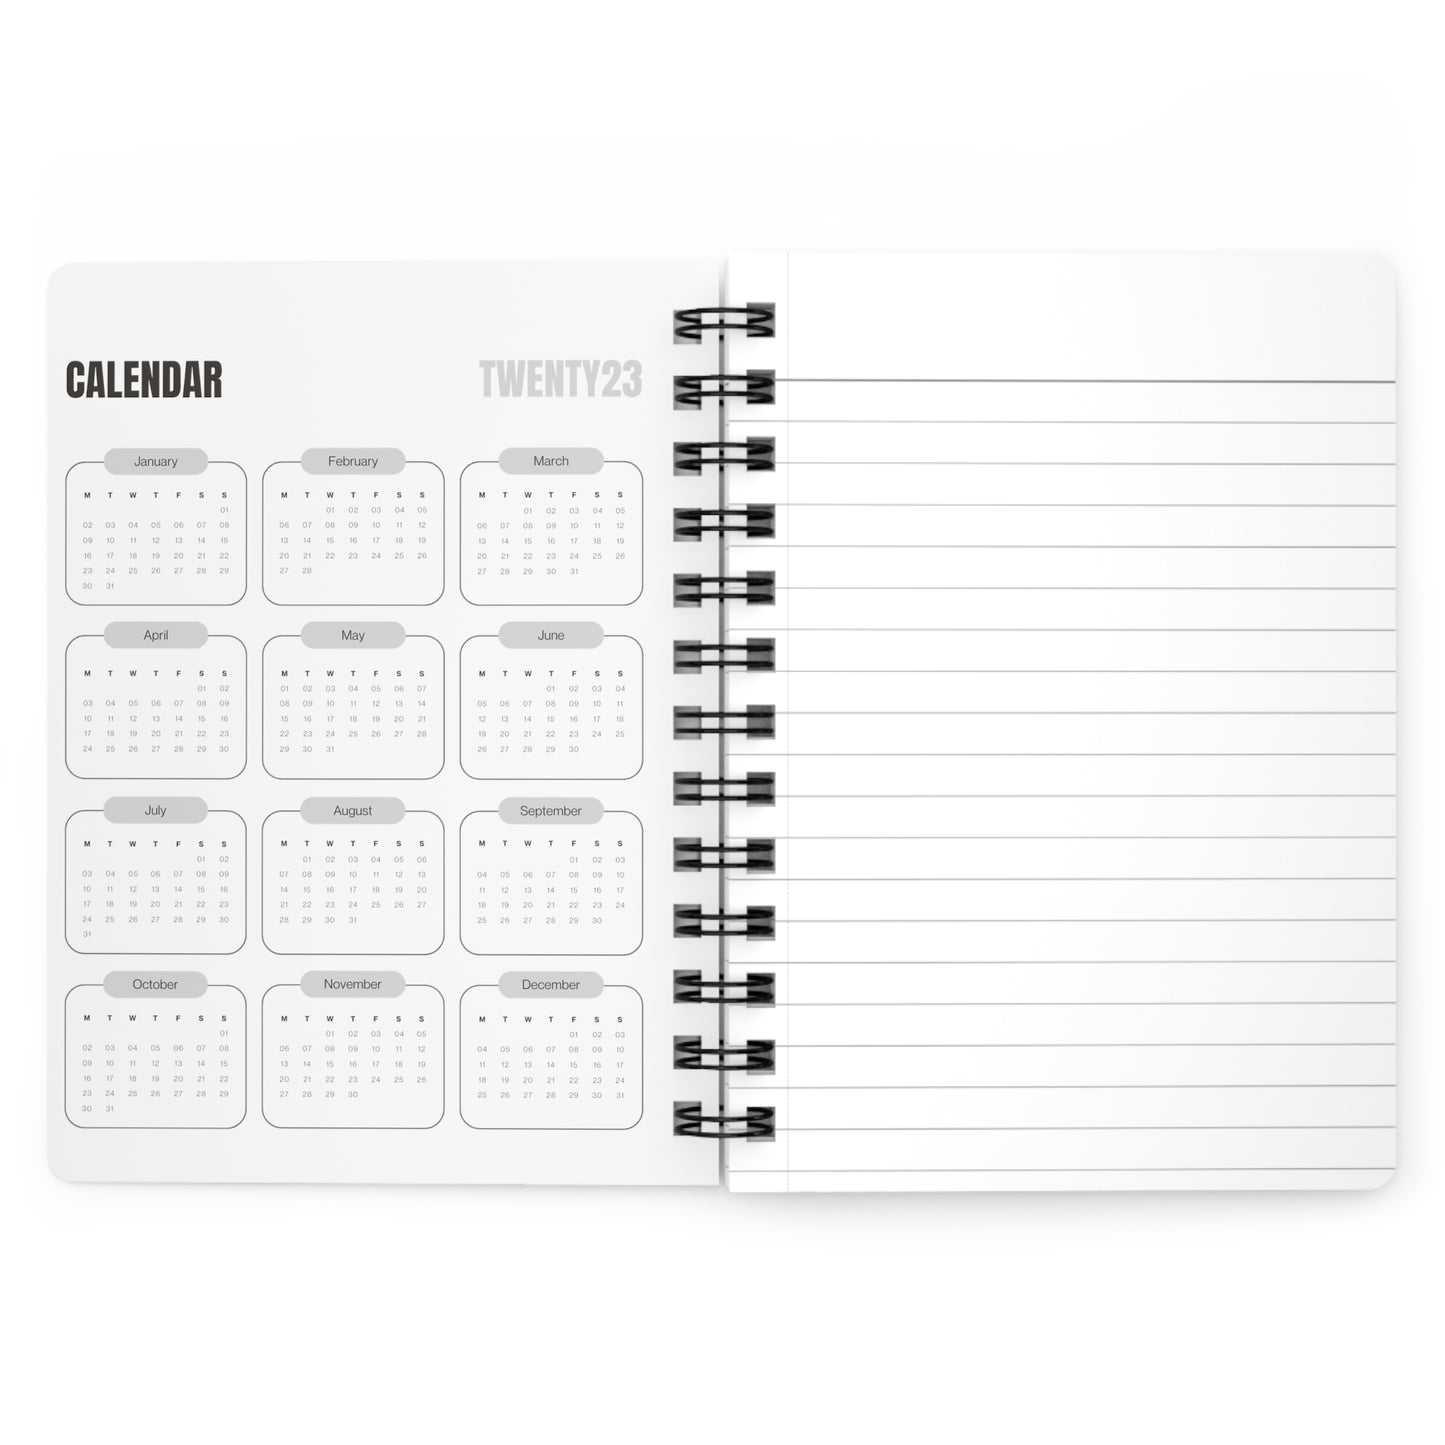 Isn't She Lovely Spiral Bound Notebooks and Journals with 2023-2024 Year-at-a-Glance Calendar